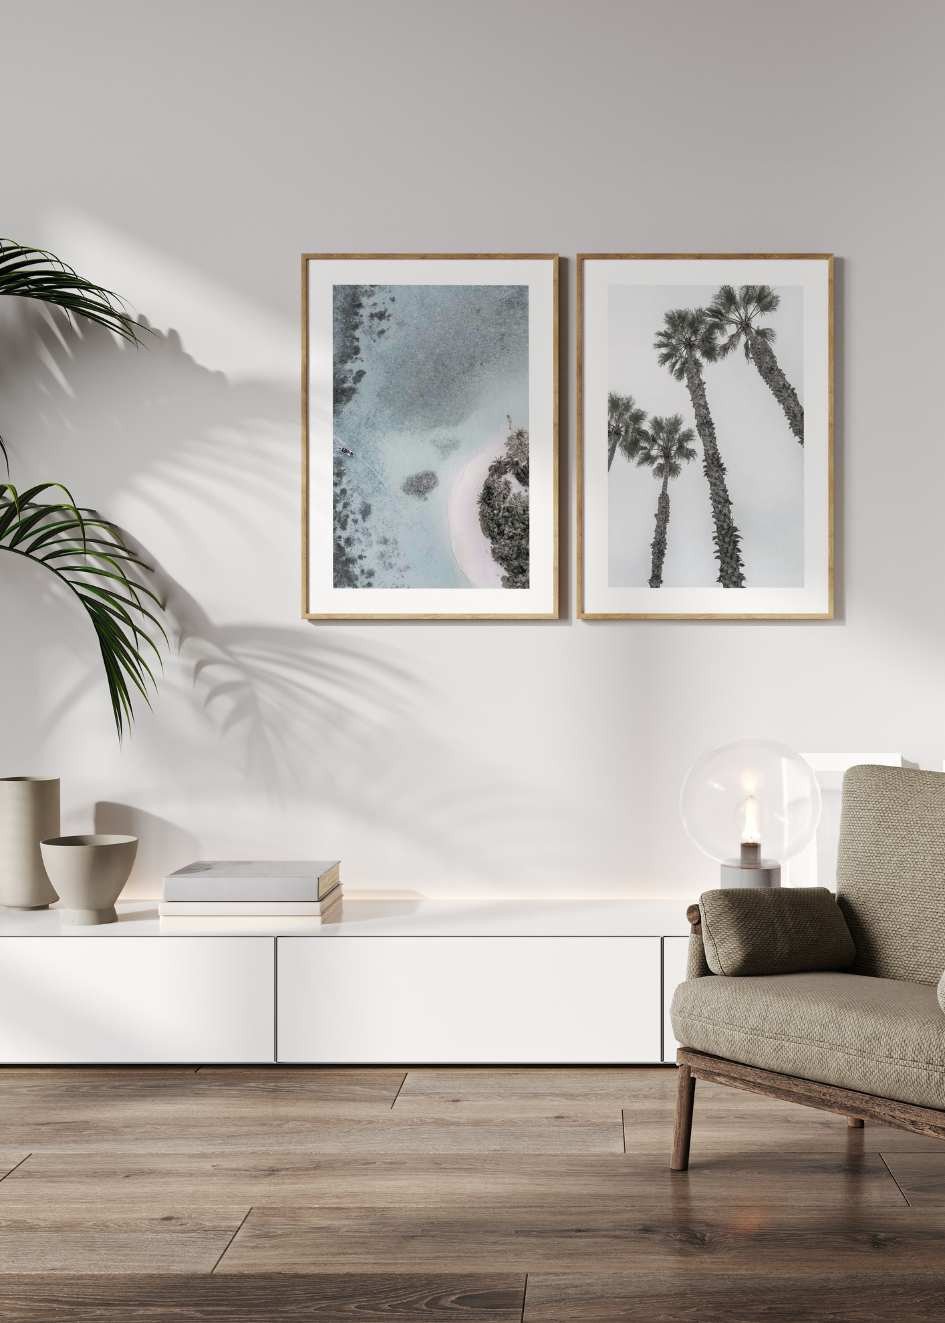 Palm Poster